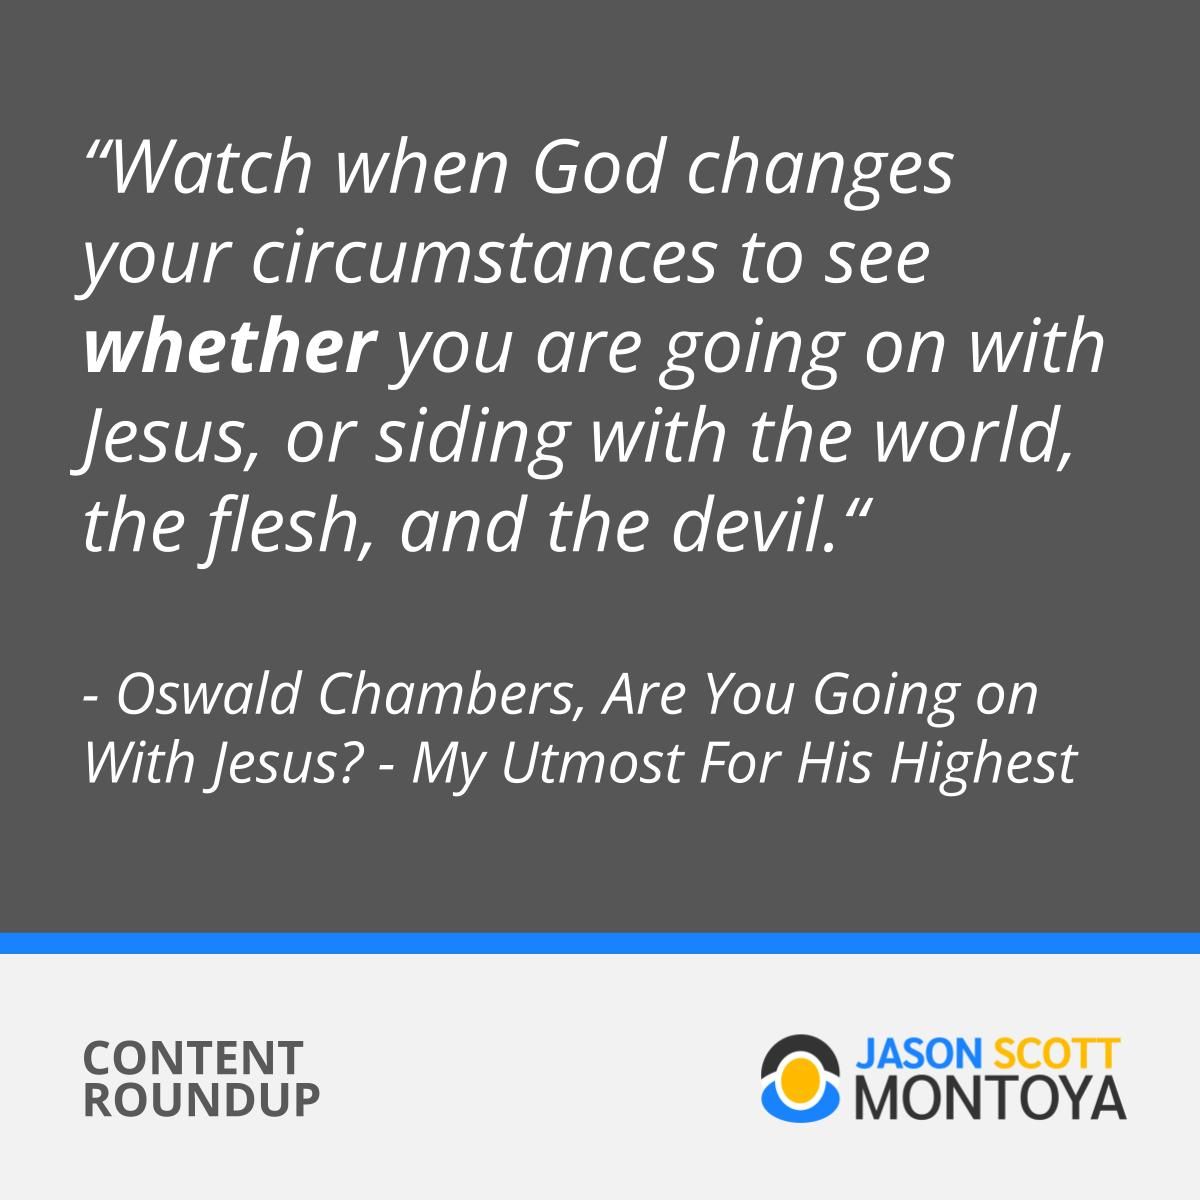 “Watch when God changes your circumstances to see whether you are going on with Jesus, or siding with the world, the flesh, and the devil.“ - Oswald Chambers